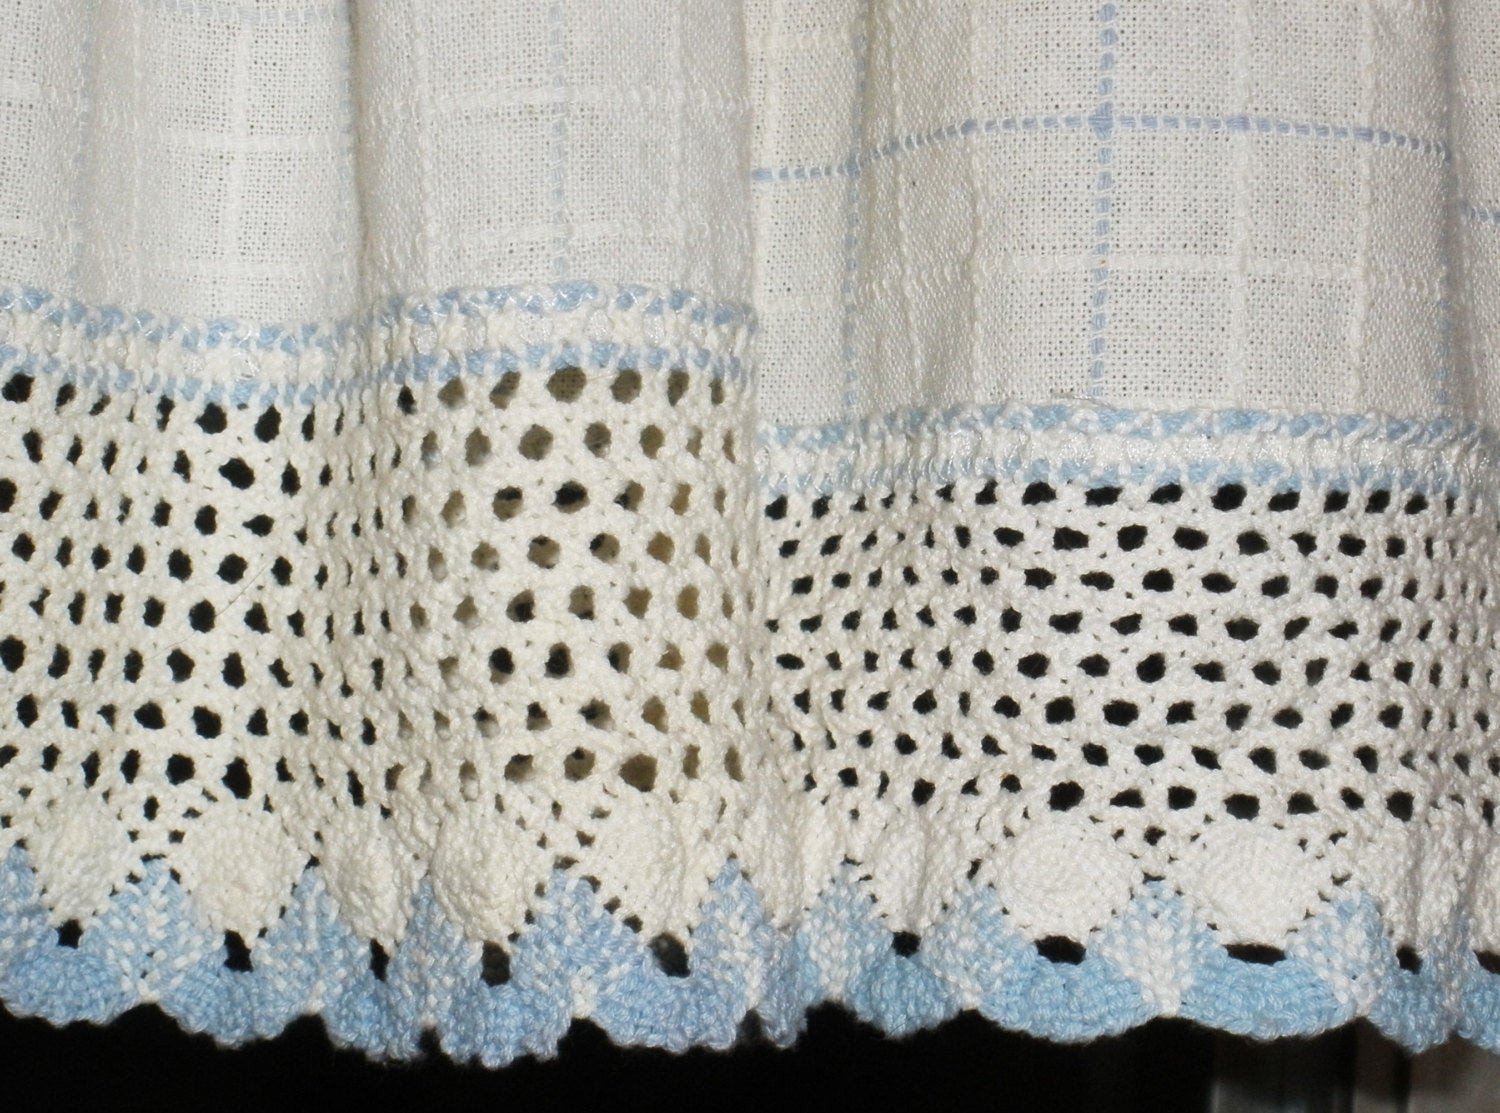 Vintage Kitchen Curtains
 Vintage Kitchen Curtains Valance White and Blue with Wide